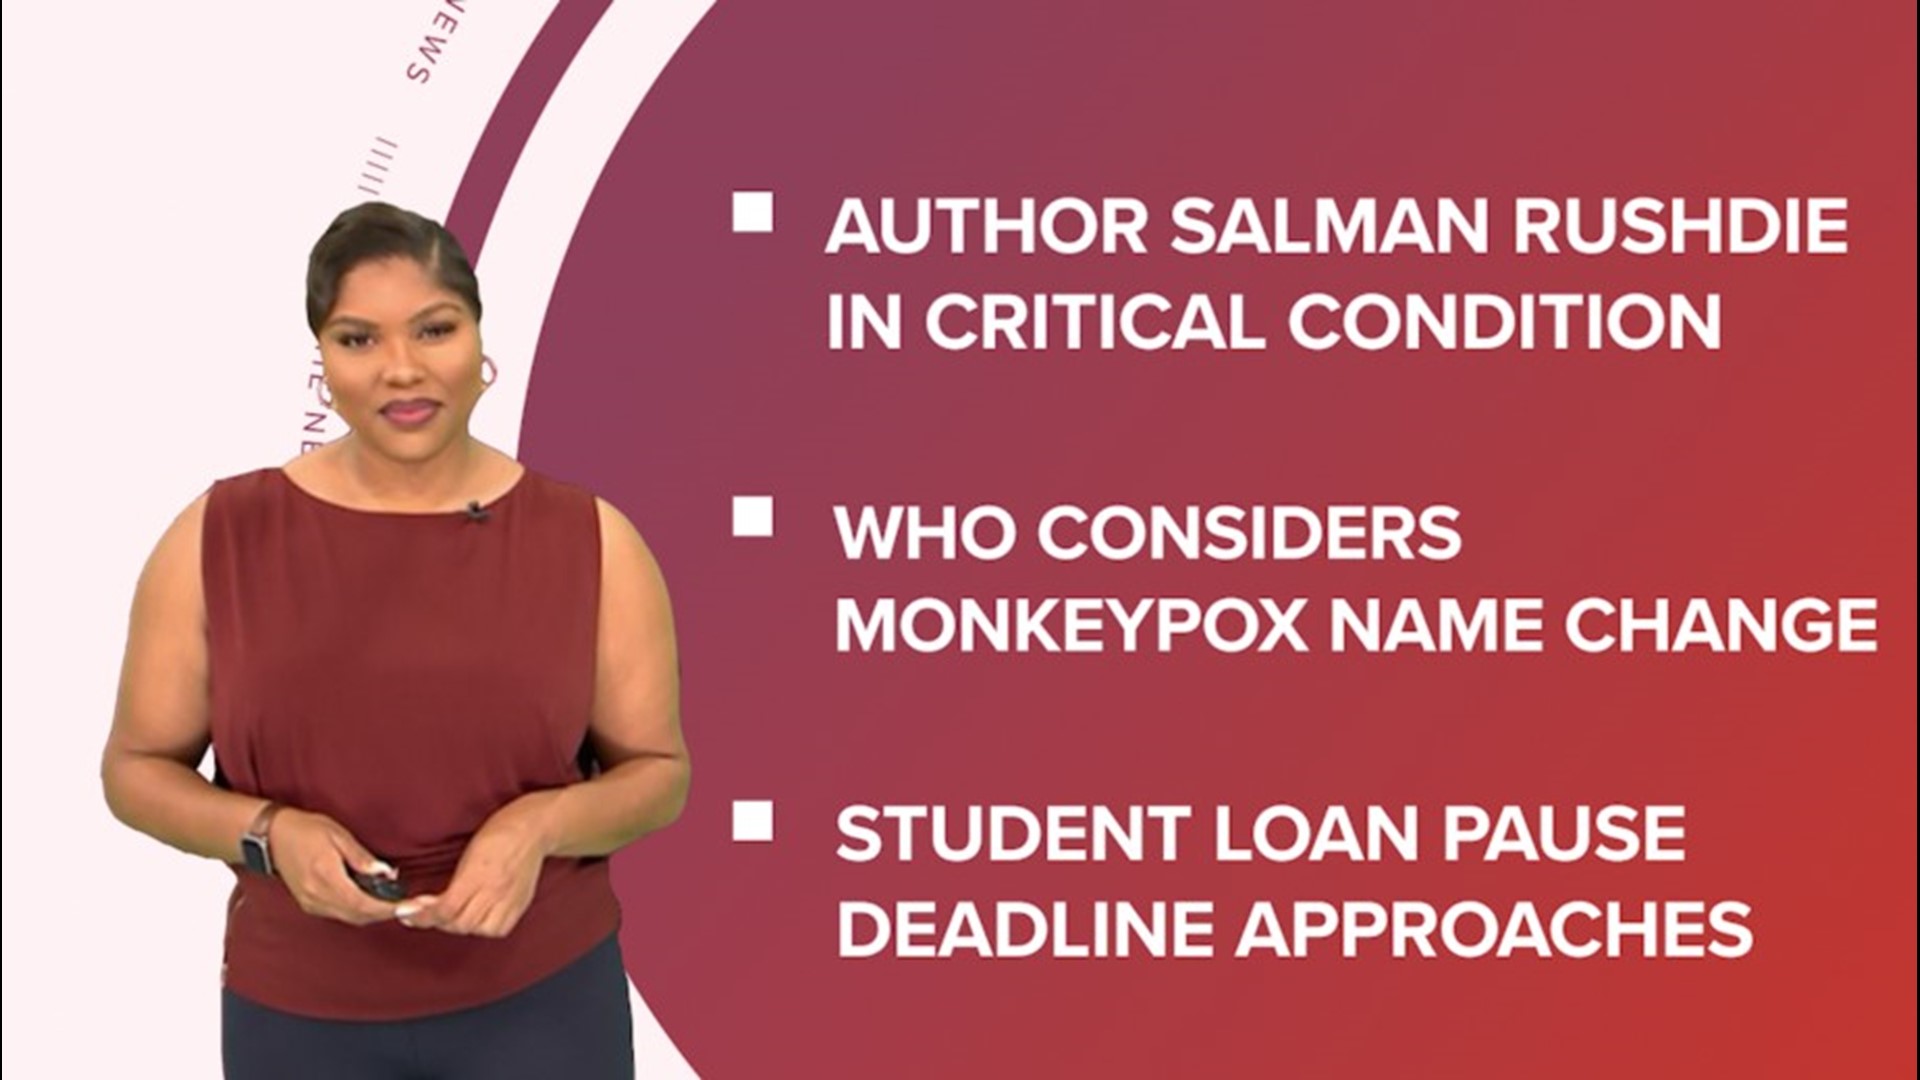 A look at what is happening in the news from the latest on the student loan pause deadline to the WHO considering monkeypox name change and Anne Heche dies.